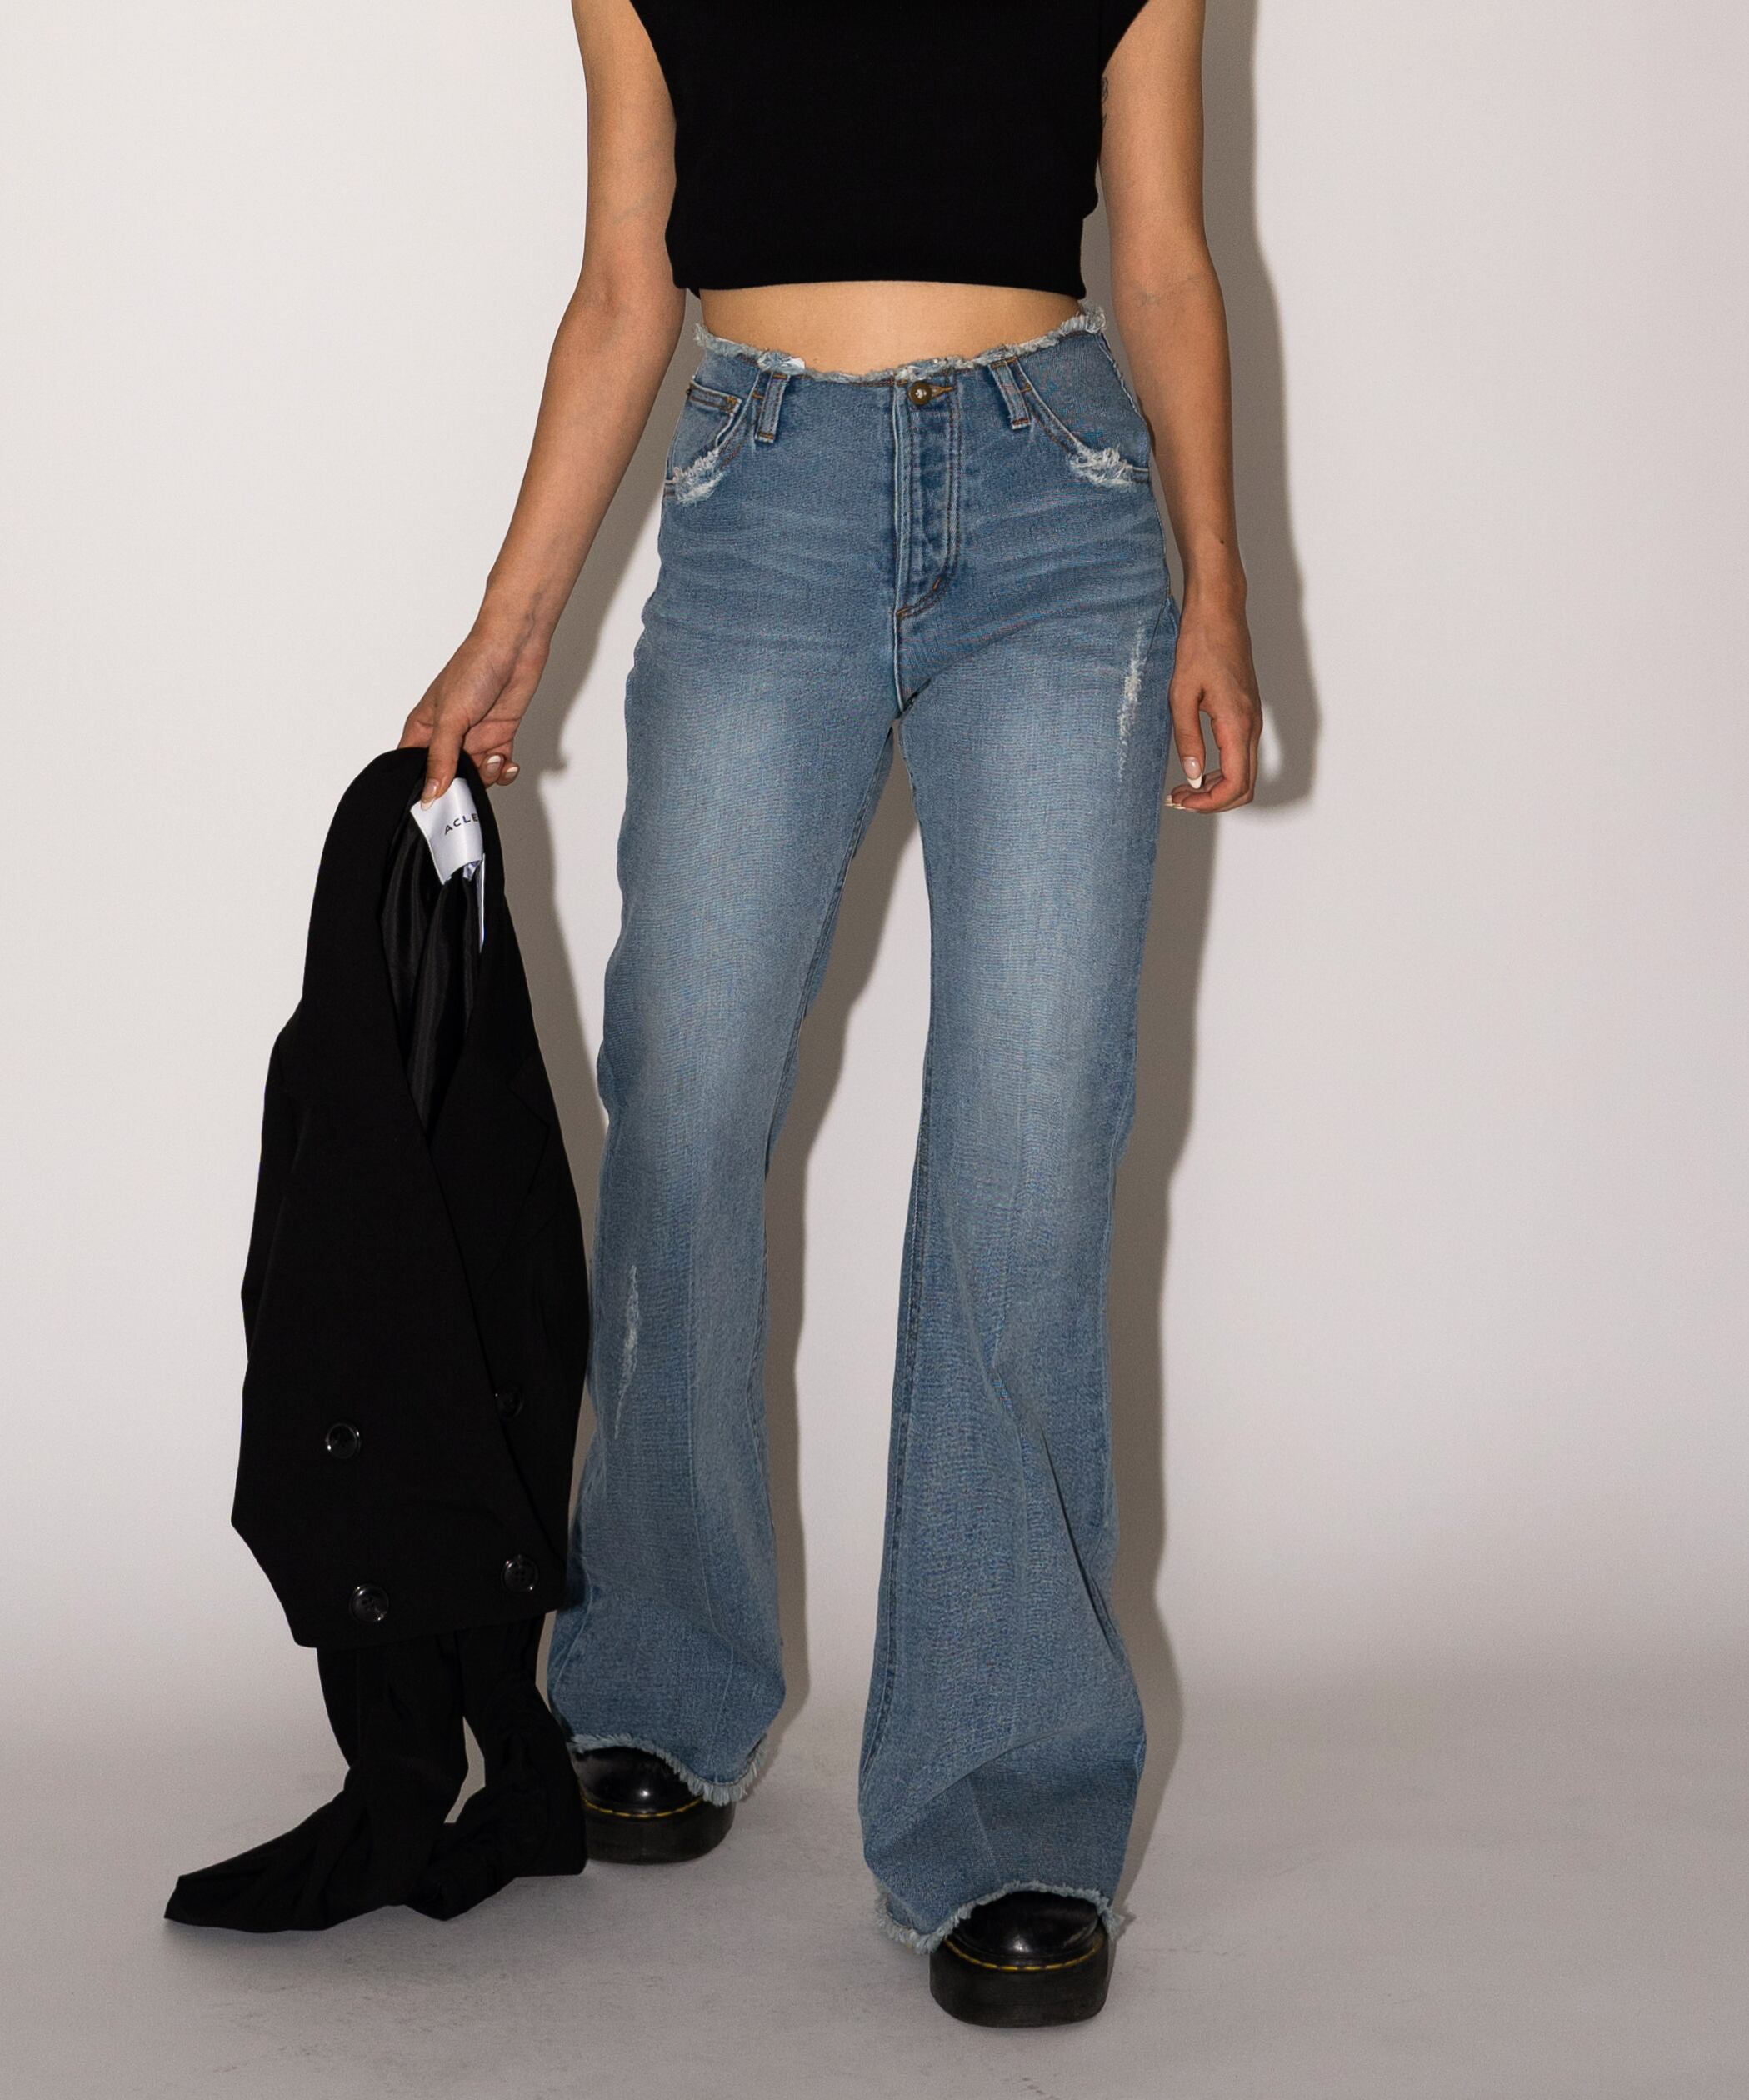 Cut off vintage jeans | ACLENT（アクレント）